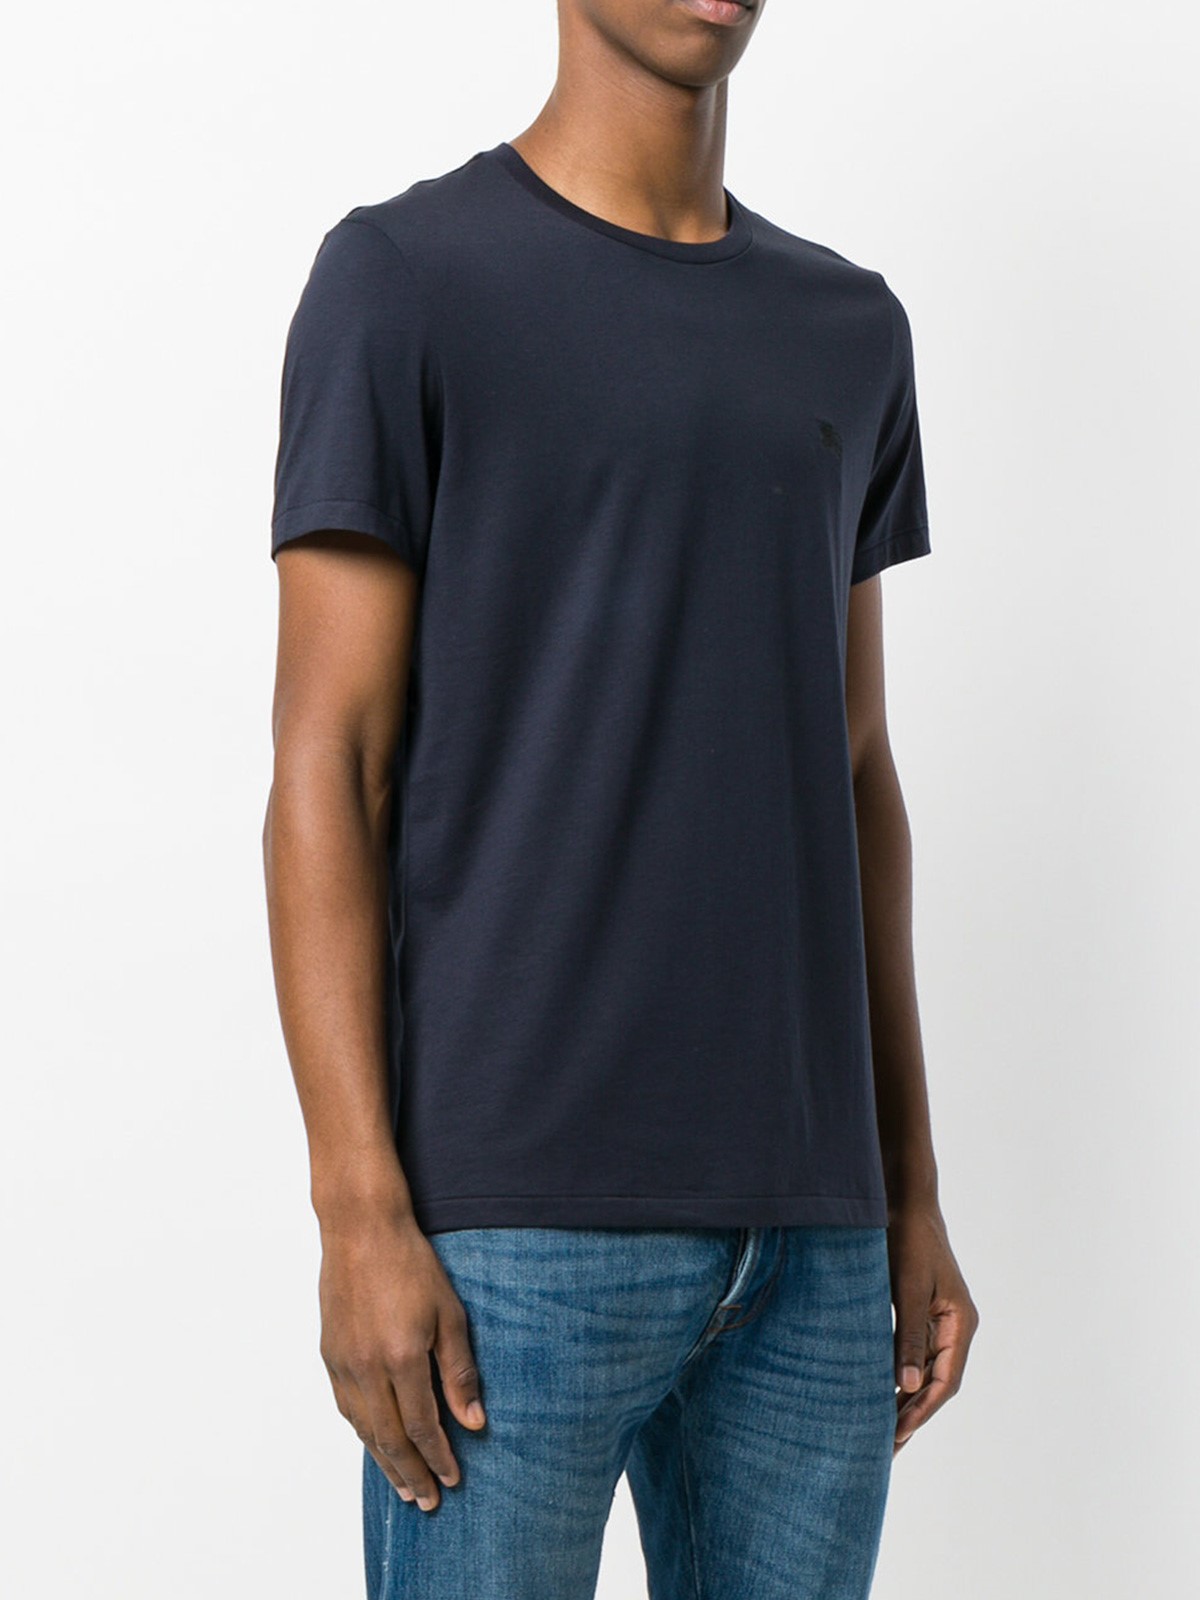 burberry T-SHIRT available on montiboutique.com - 22399